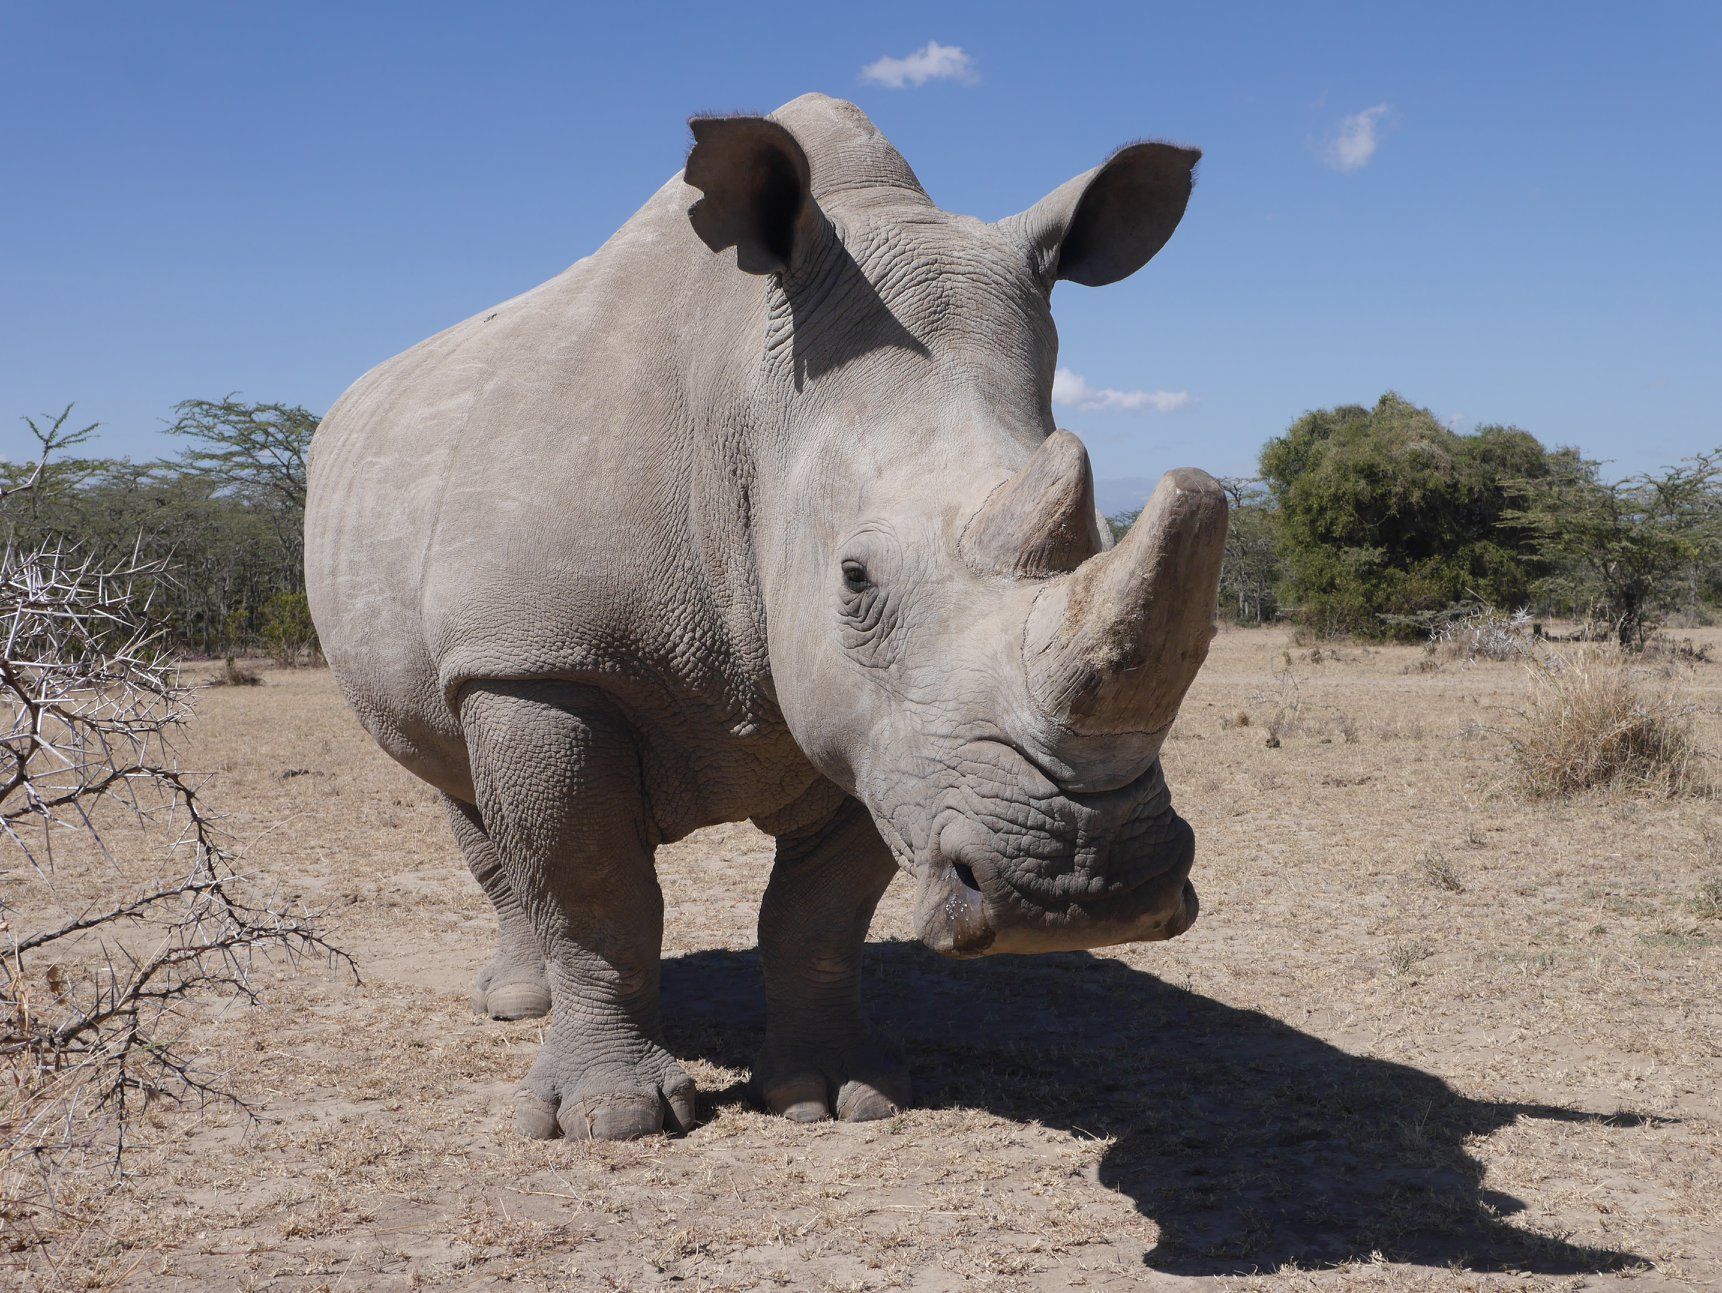 Rhino conservation in South Africa